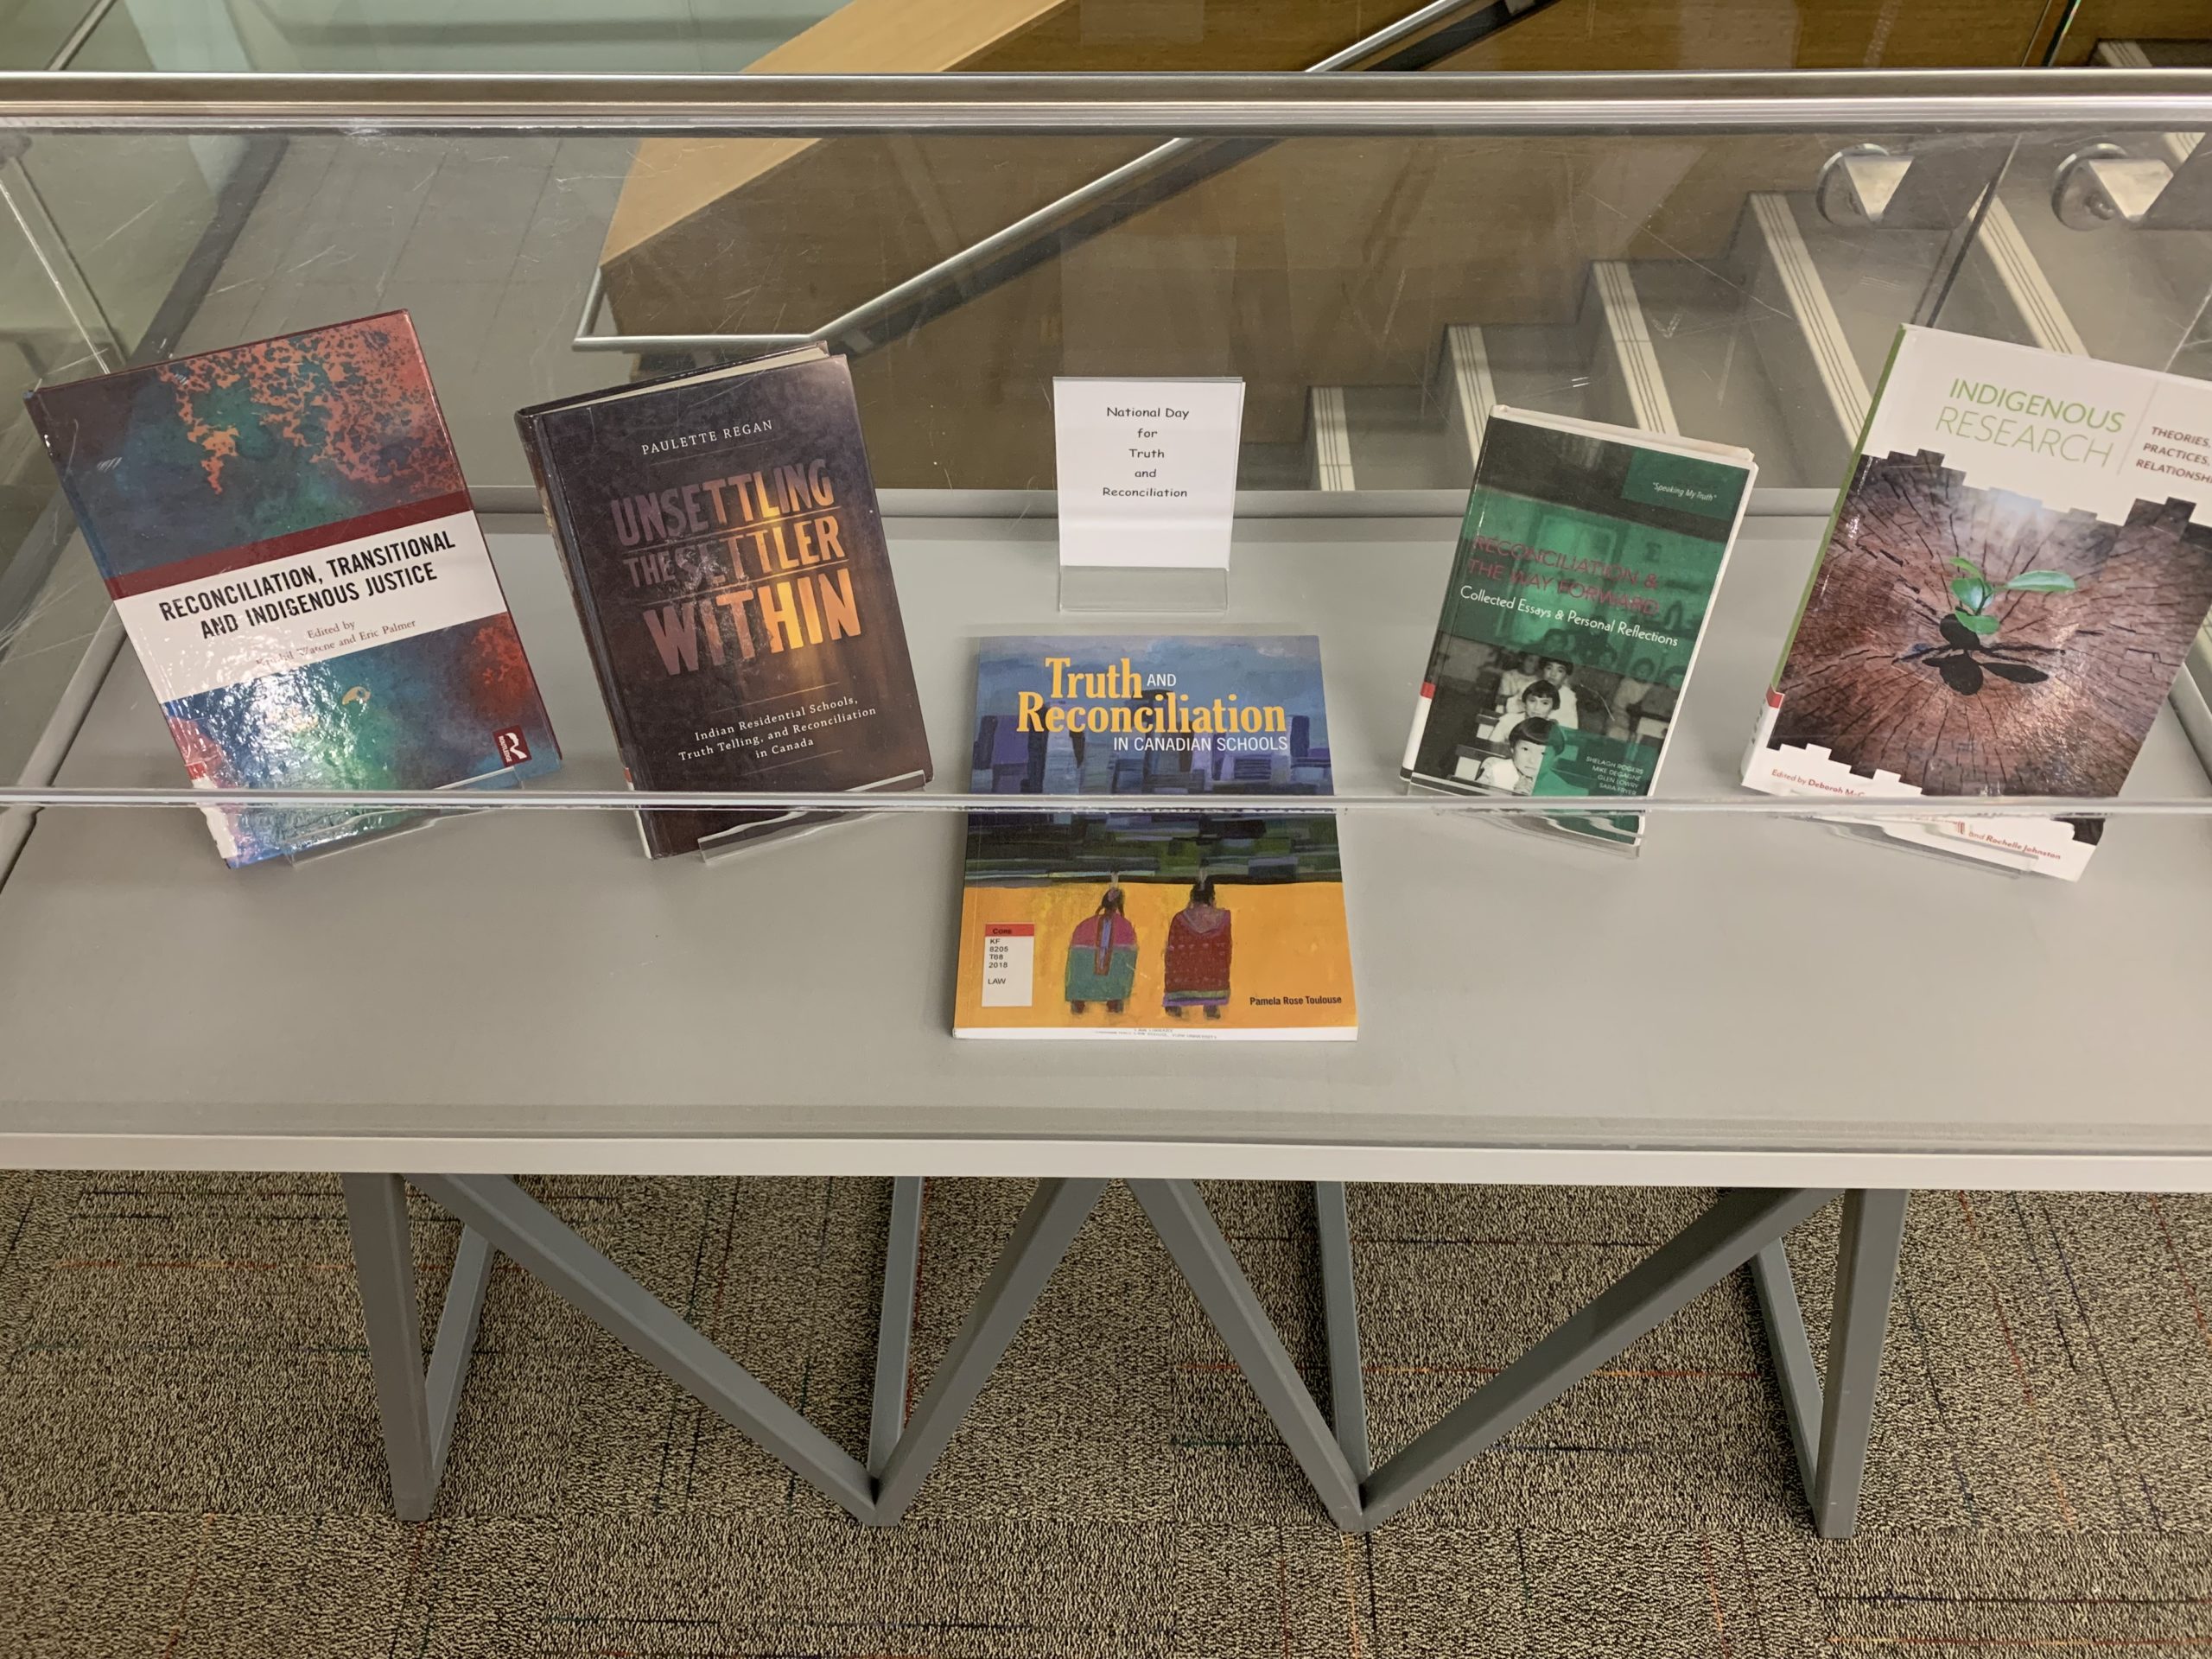 Books from the Truth and Reconciliation display.